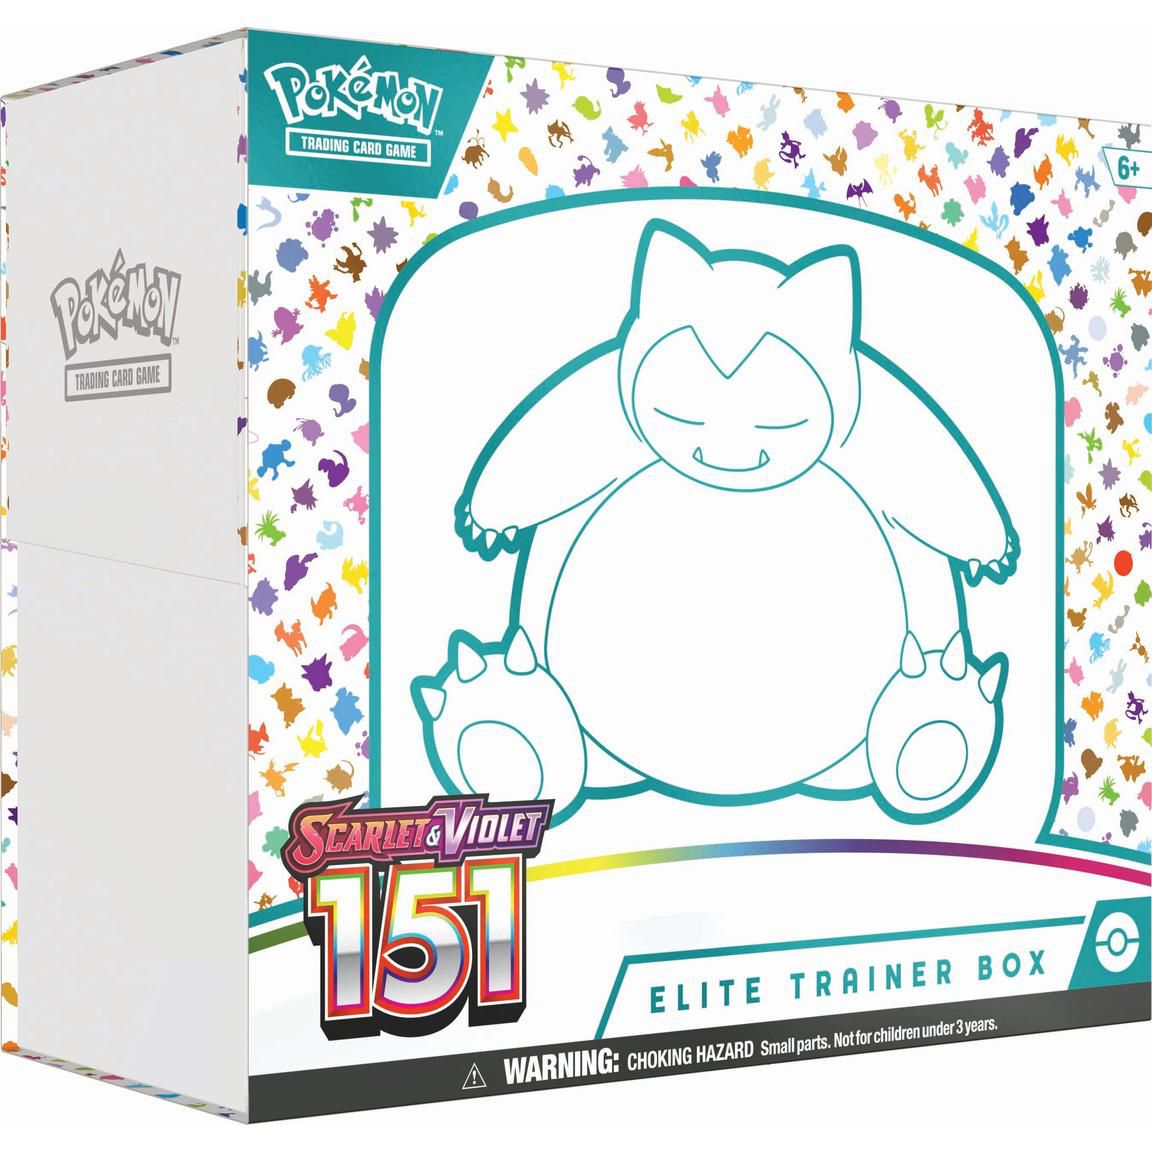 The elite trainer box for Pokémon Scarlet and Violet: 151 Collection TCG, which features a Snorlax on the packaging.